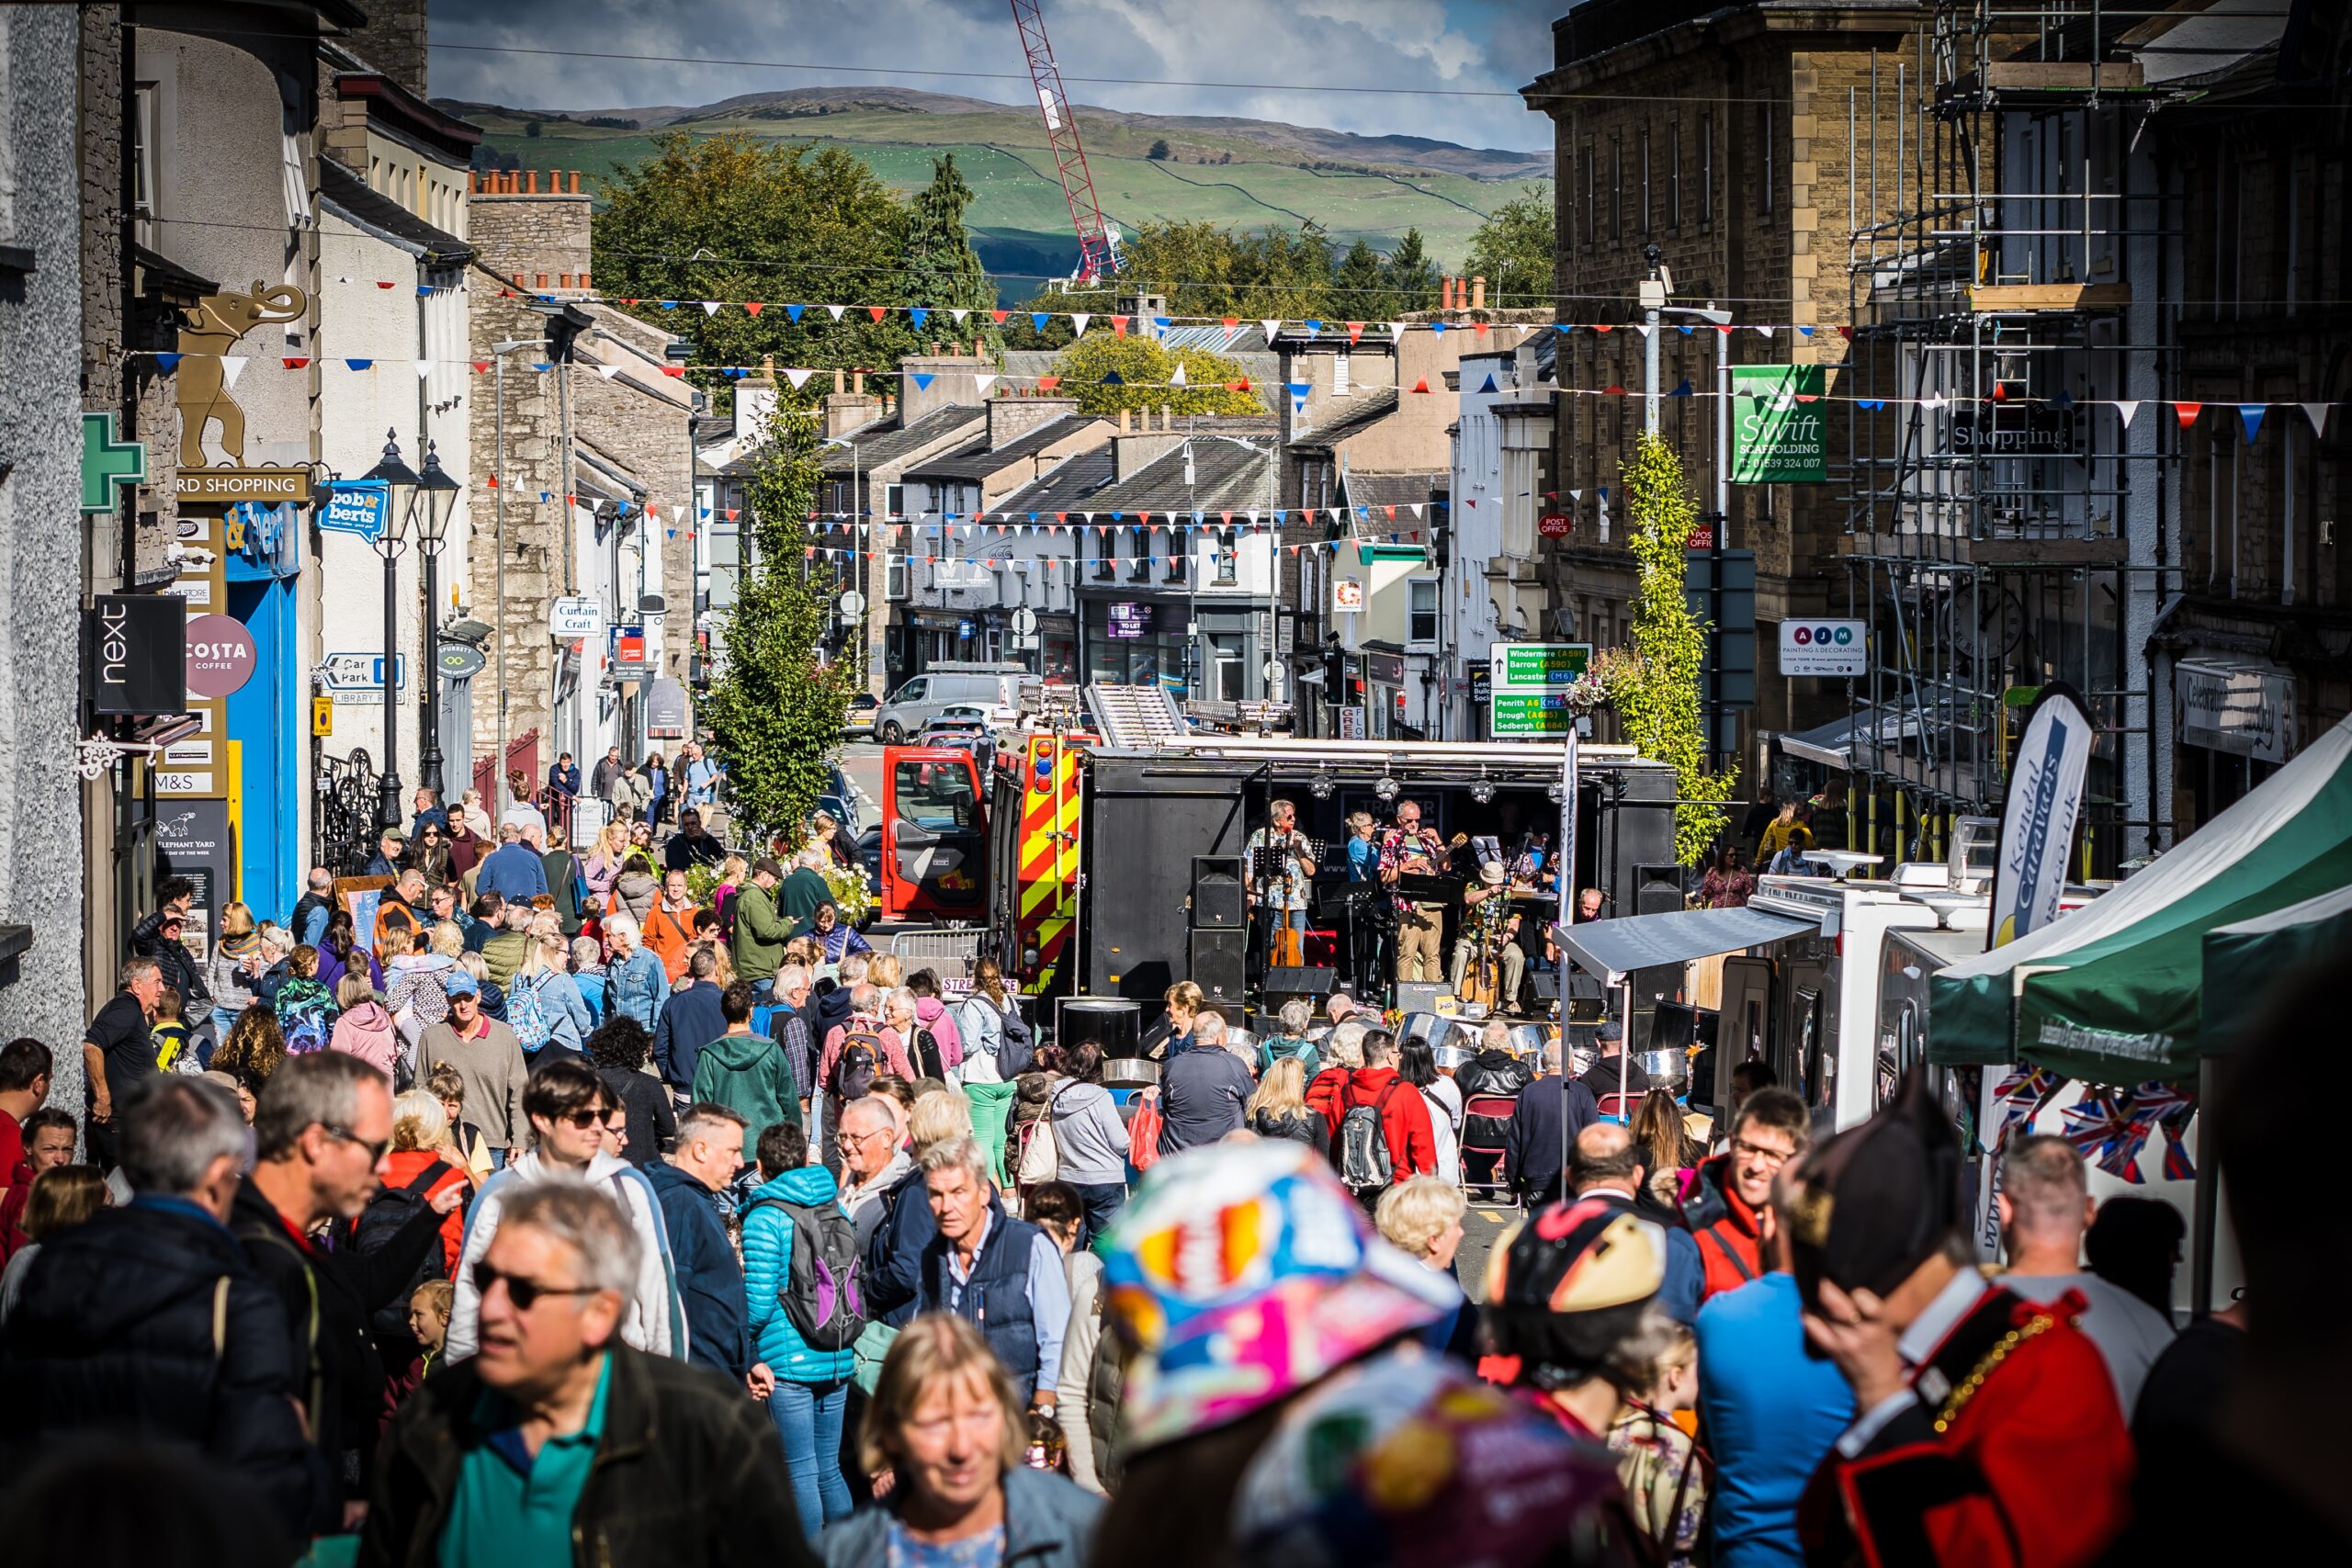 Road closed for public street party in lake district down with band and milling crowds